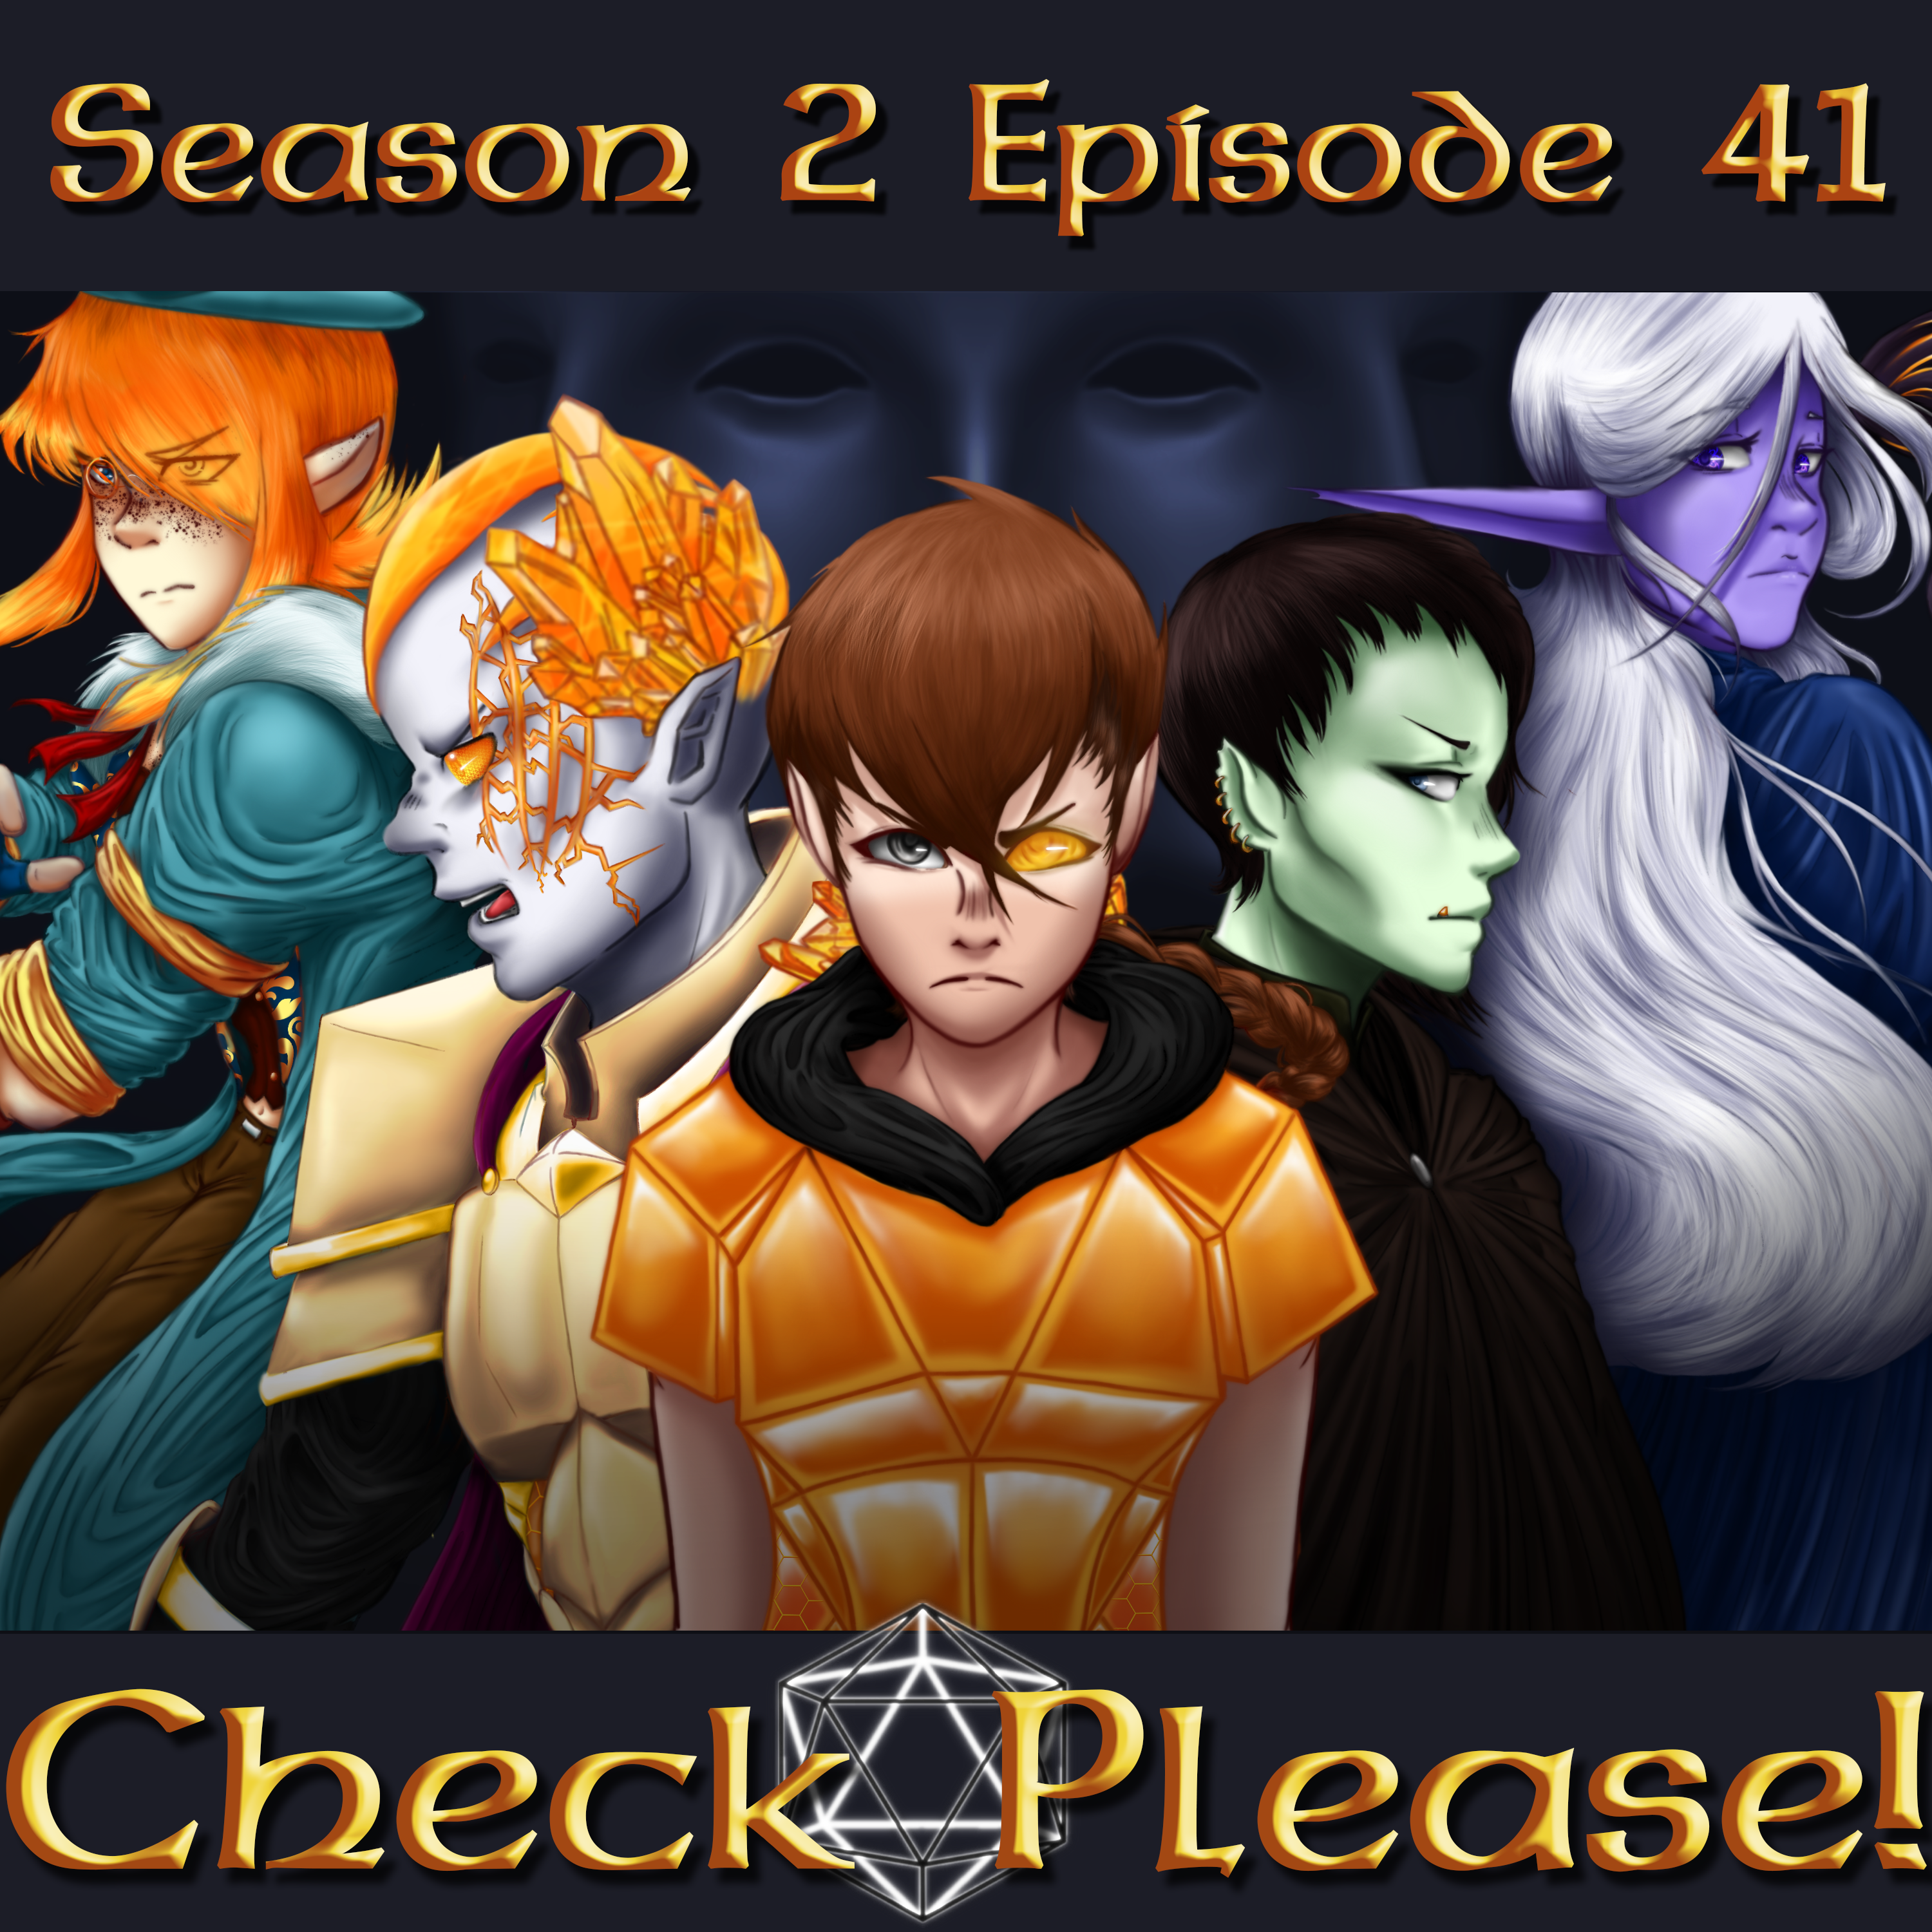 Check Please! S2 E41: To Give is To Forget